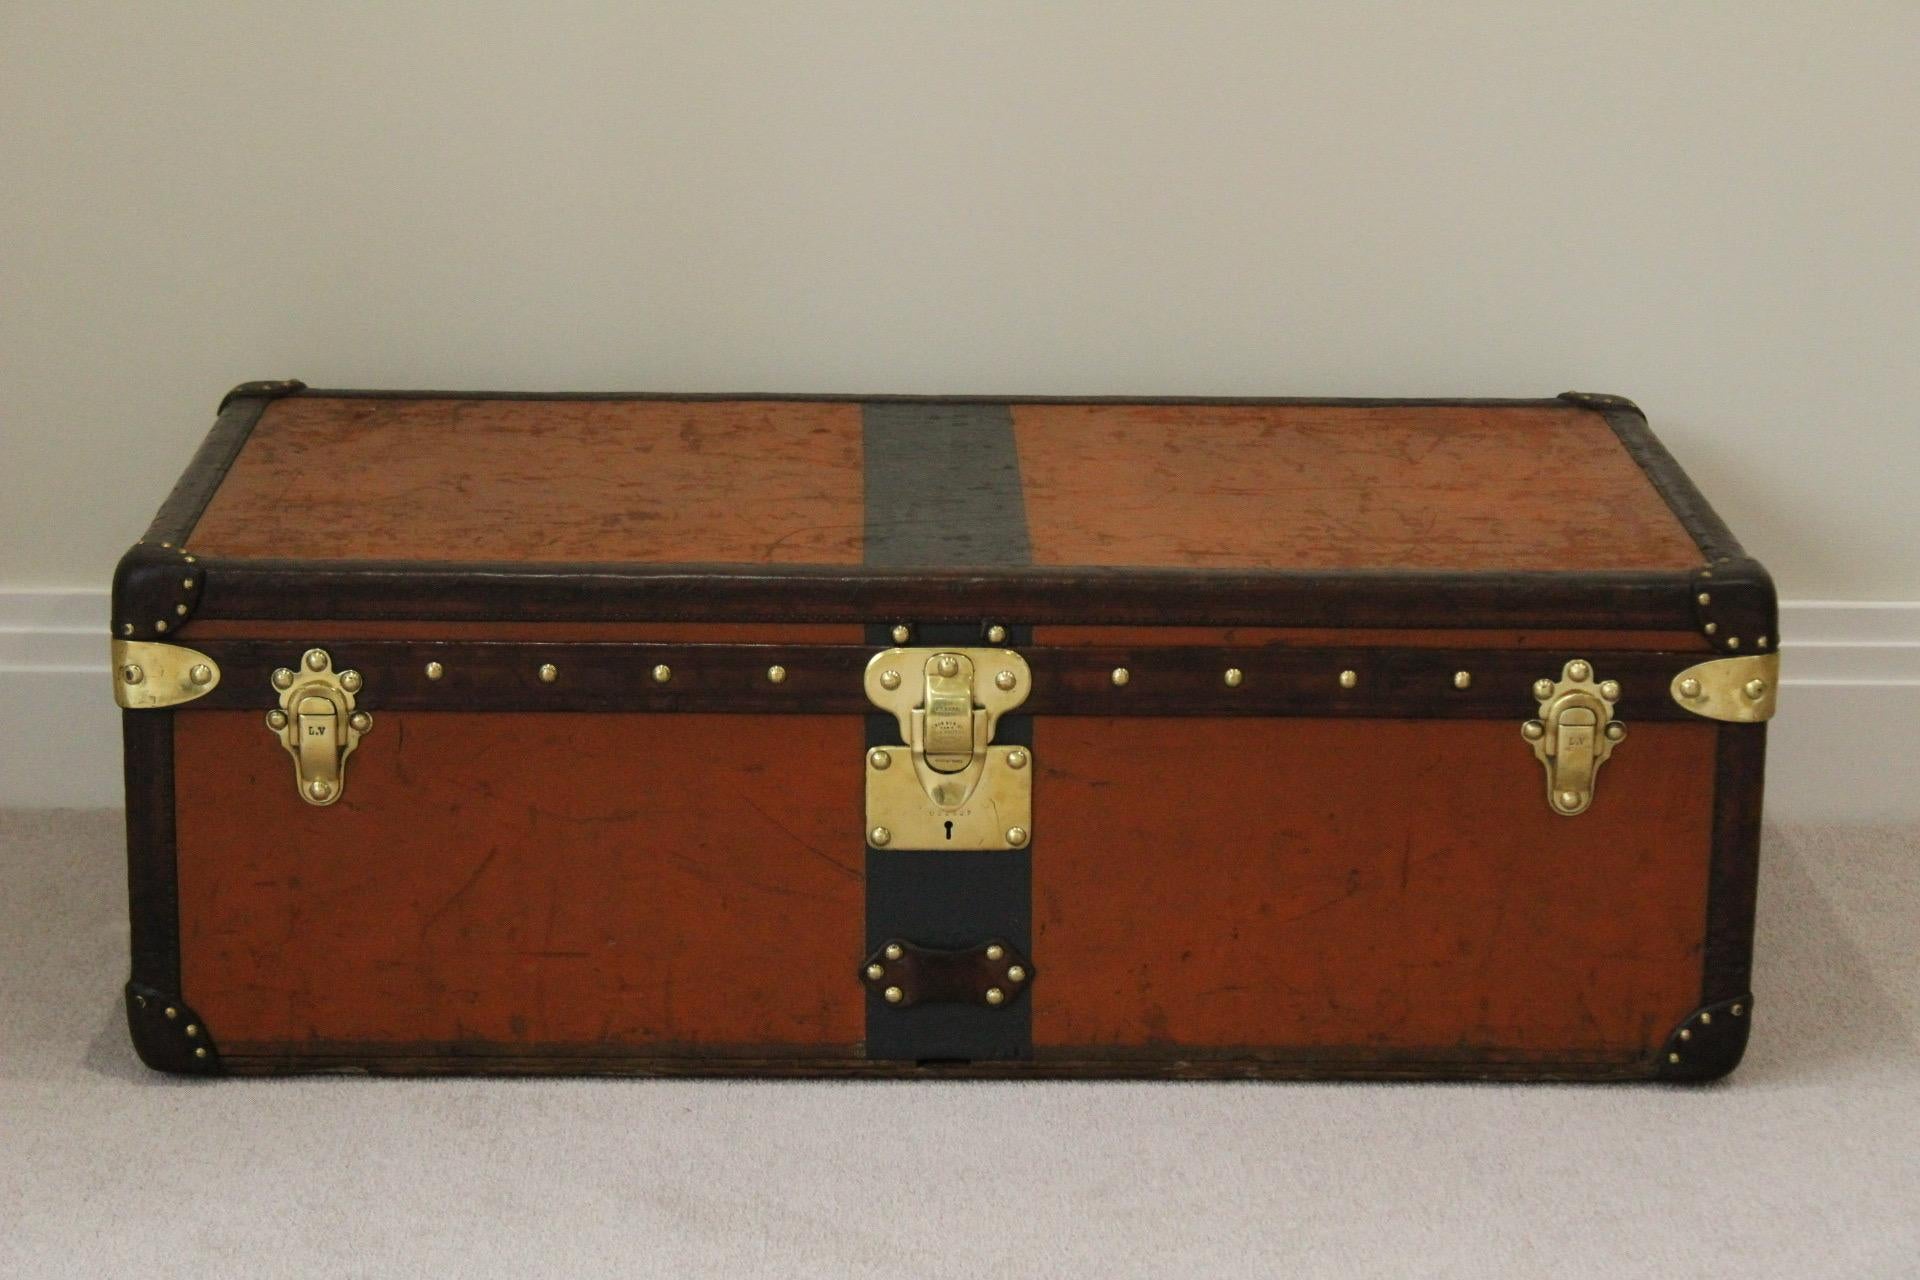 Louis Vuitton Vuittonite cabin trunk finished in iconic orange waterproof canvas with brass stamped hardware, leather trim and leather handles.

Condition Report: Good condition

Please refer to the photos for more details

Dimensions: 100cm x